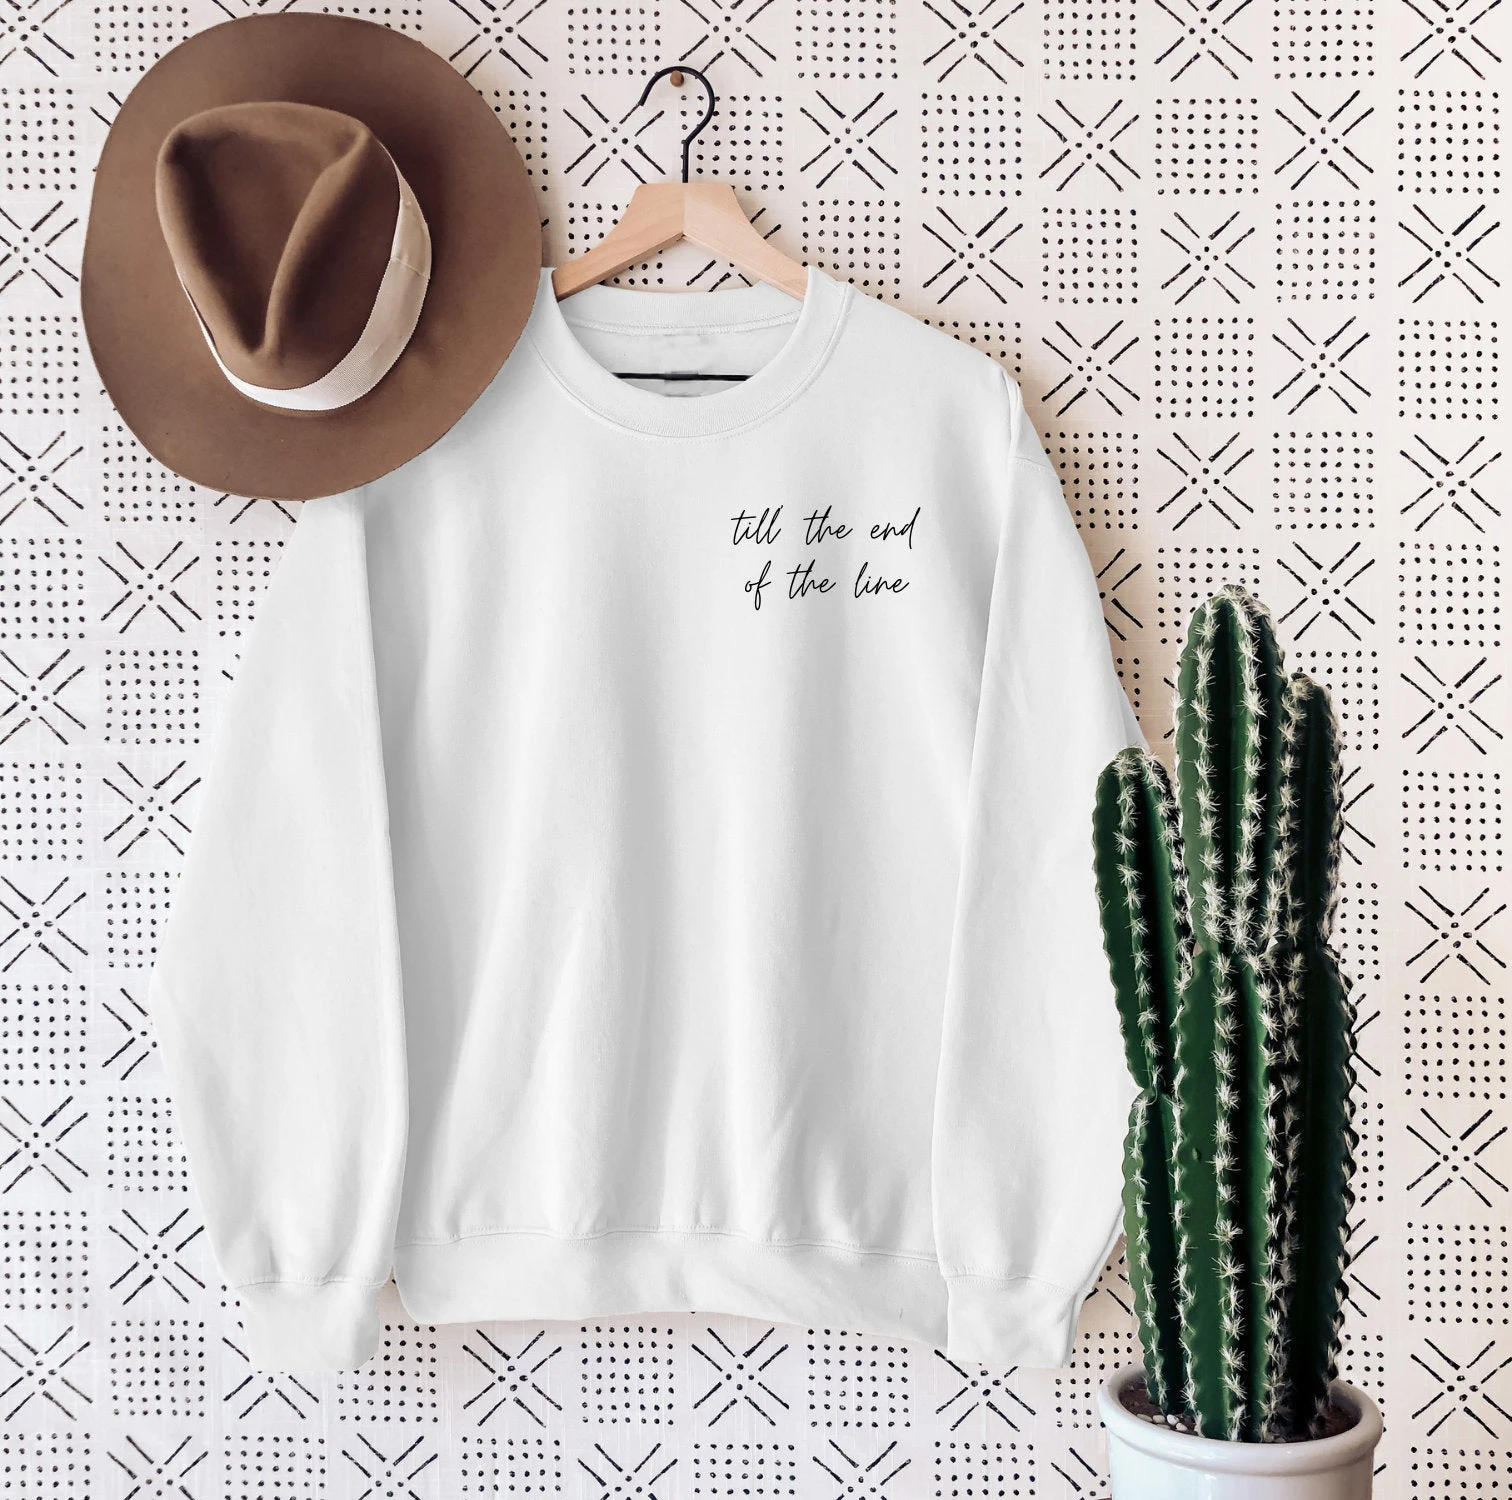 

Till' the End of the Line Sweatshirt pure cotton casual hipster slogan church pullovers quote grunge party youngs gift art tops